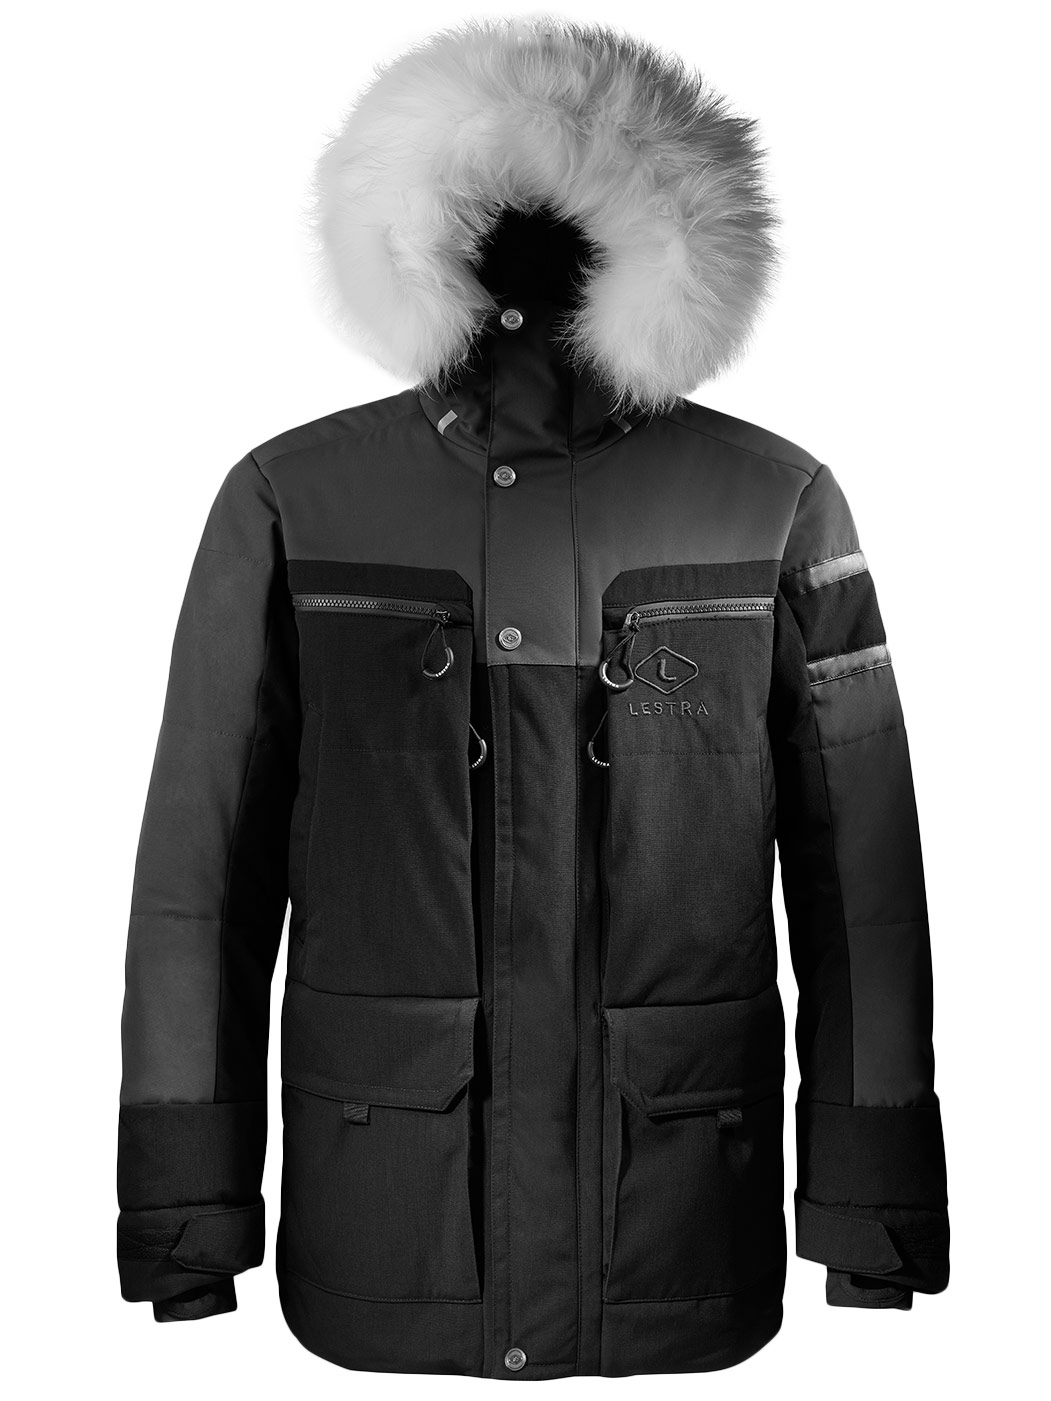 parka froid extreme homme